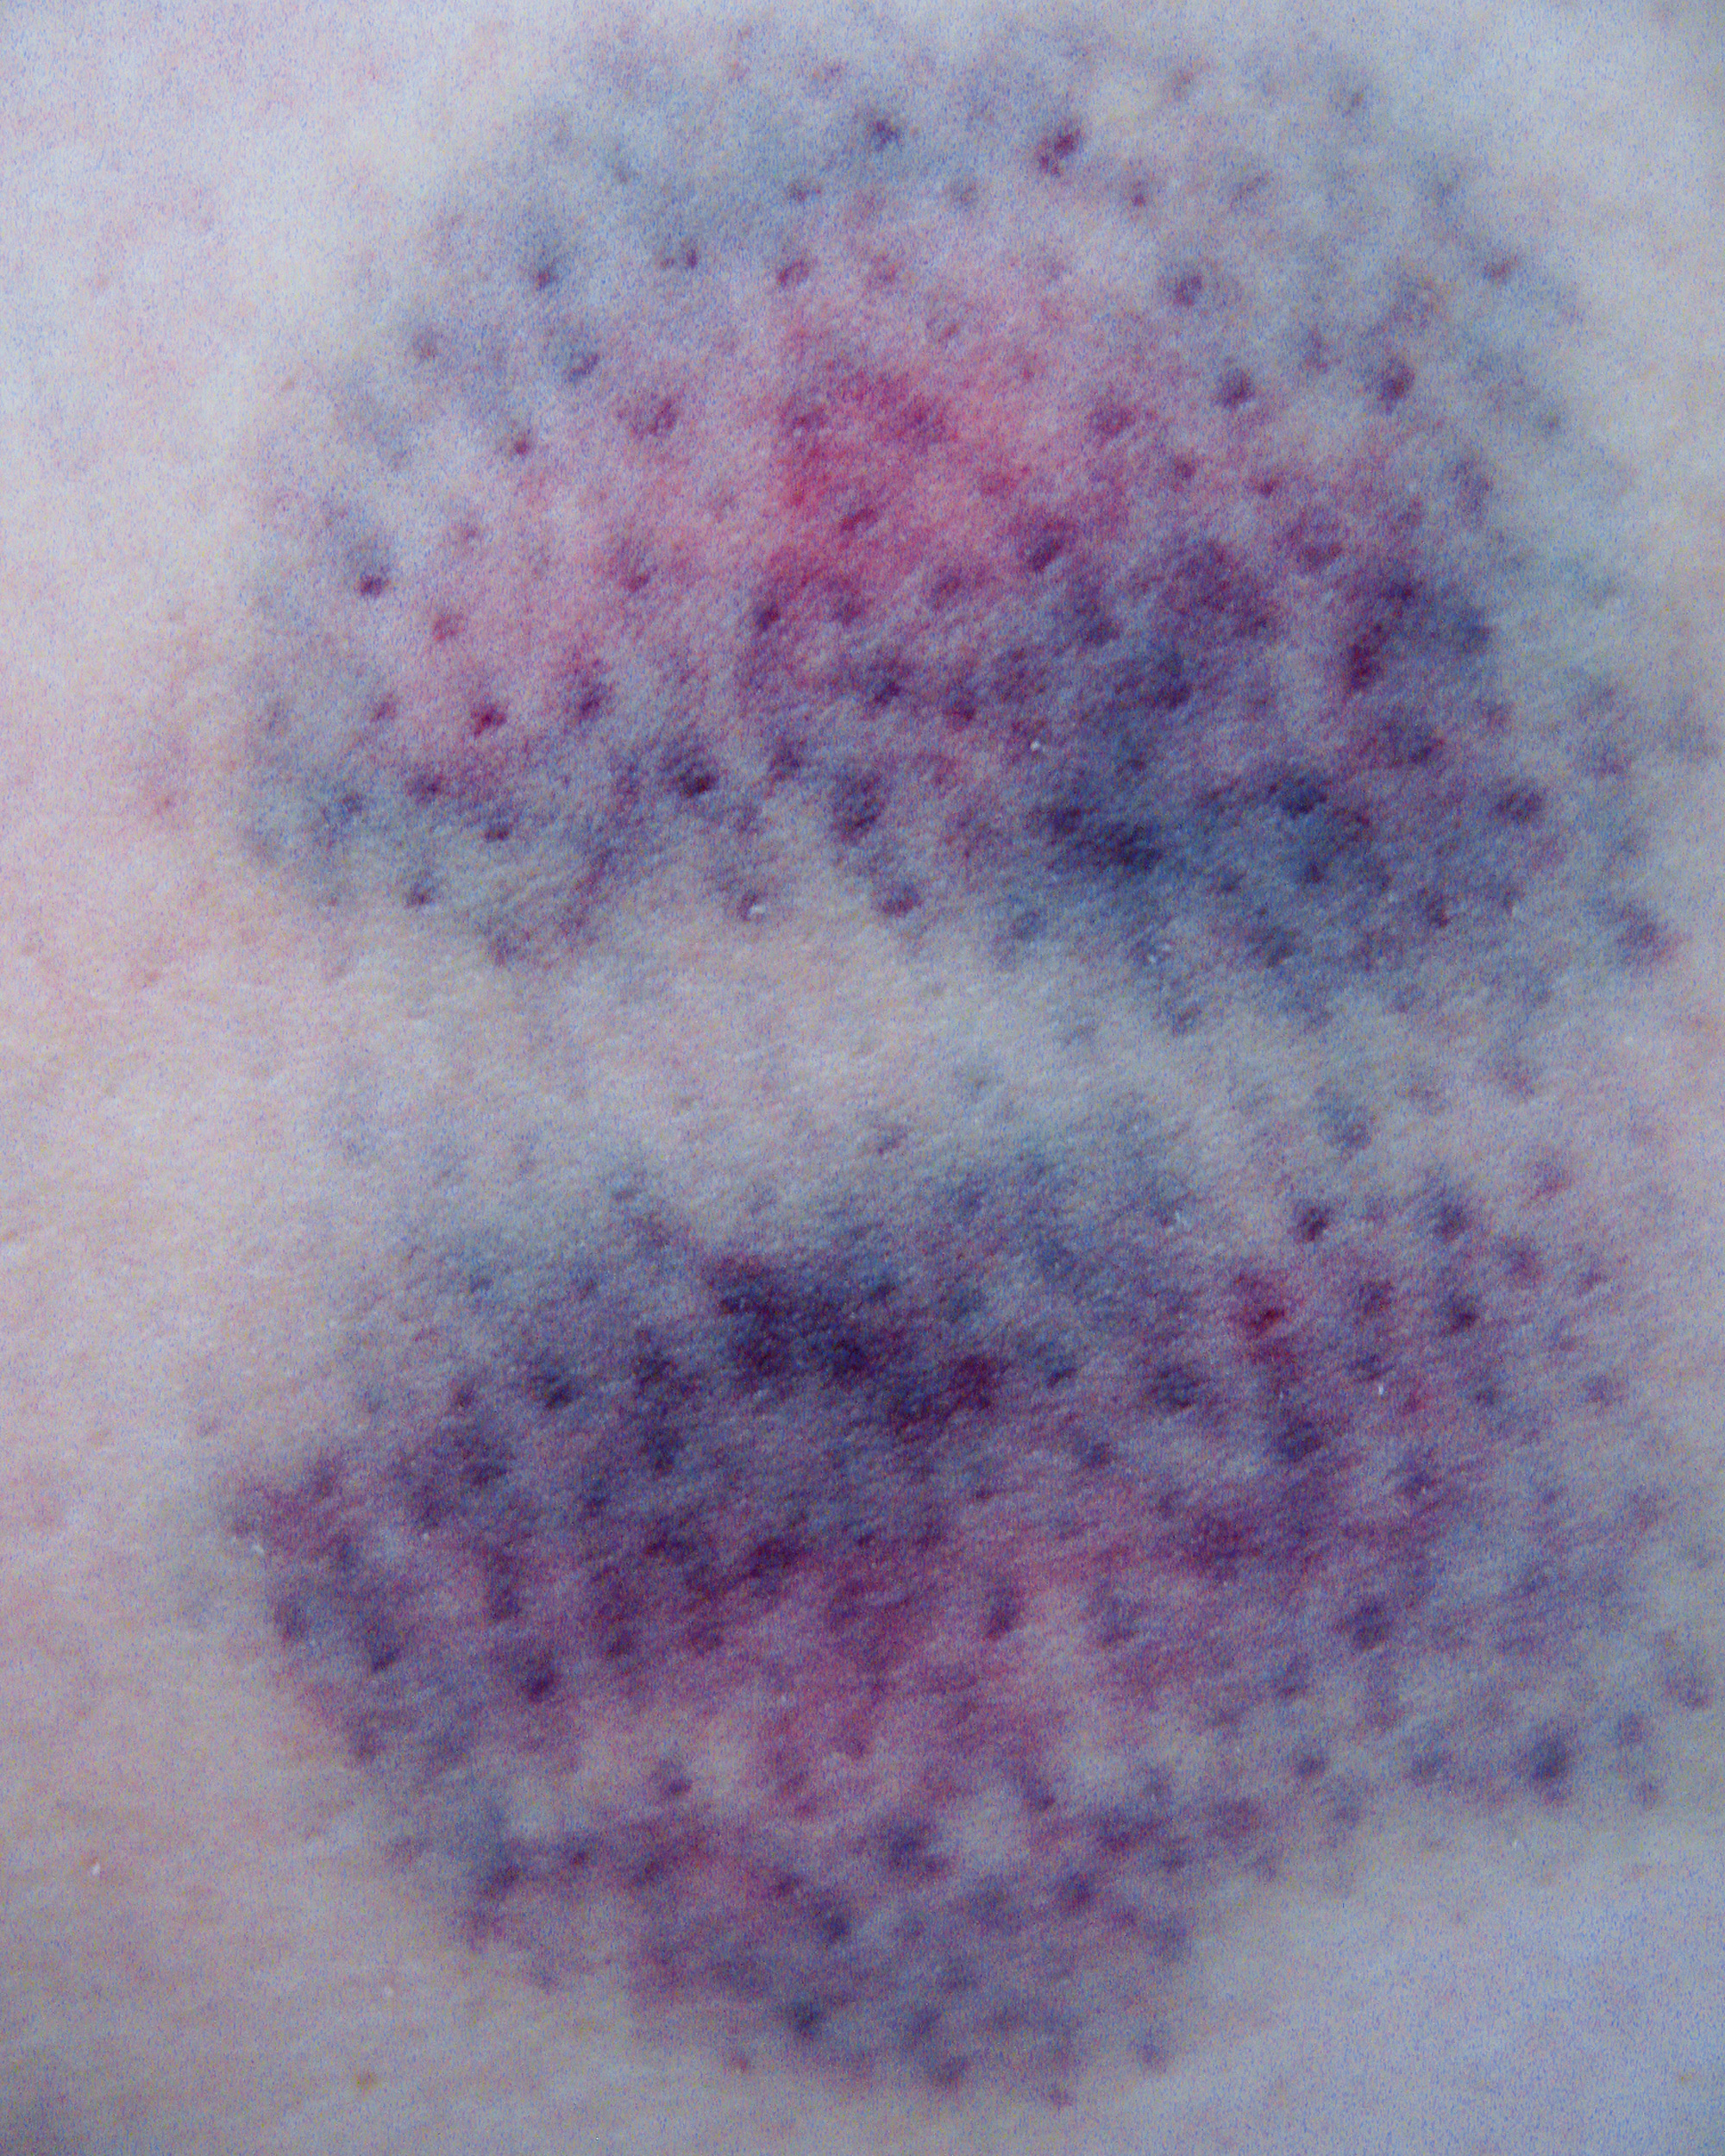 A close-up photograph of a bruise. 